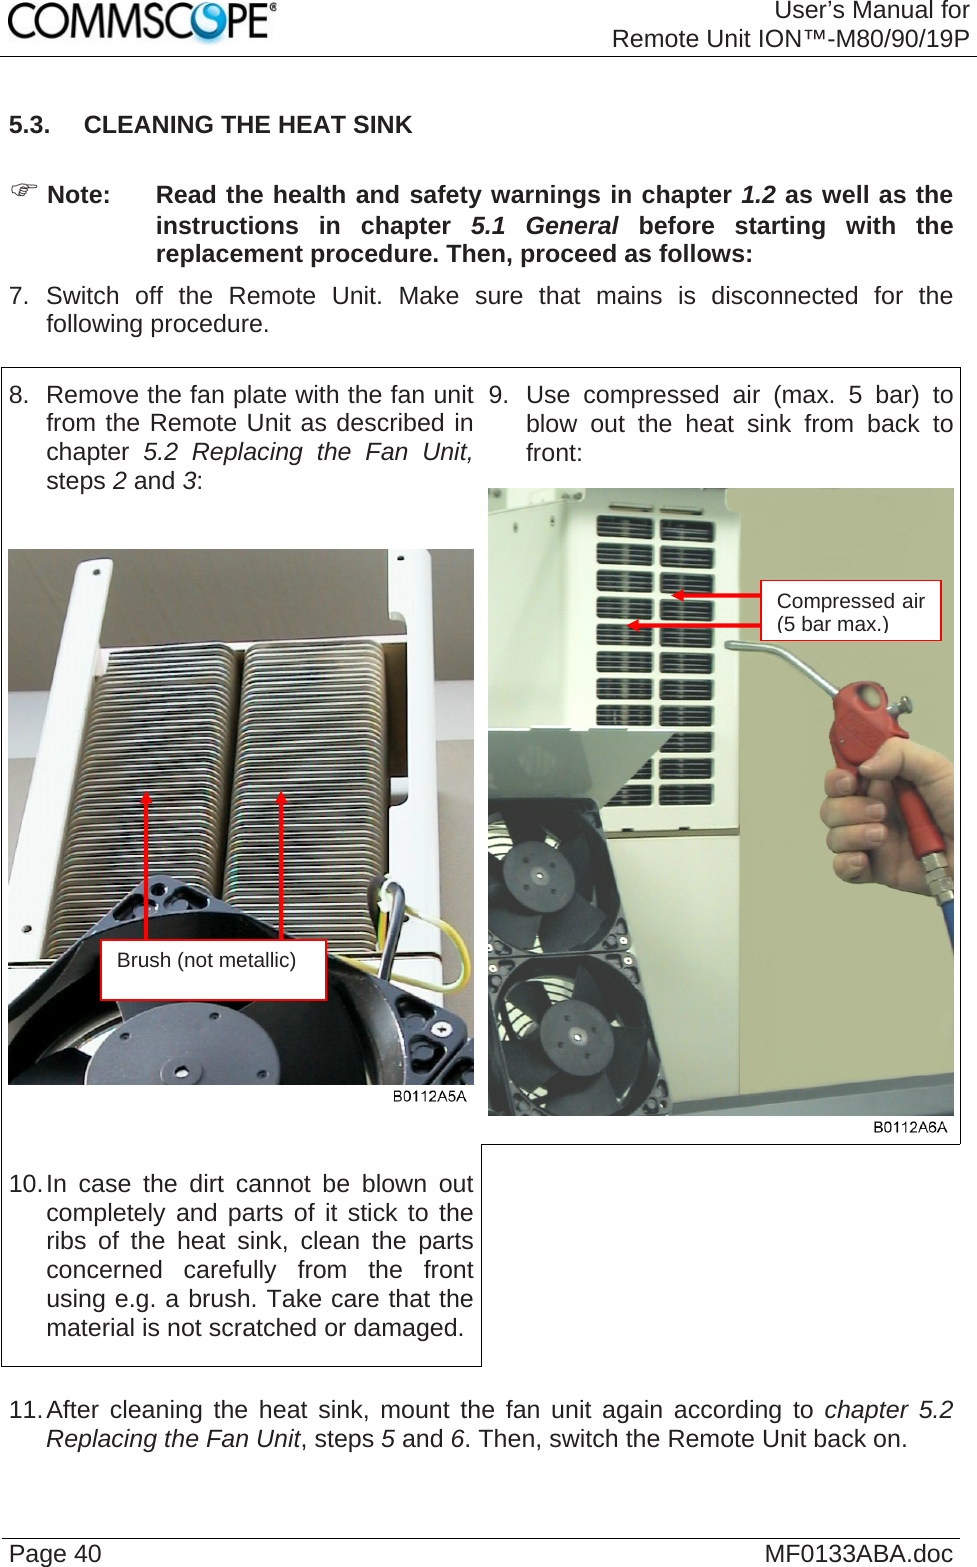 User’s Manual forRemote Unit ION™-M80/90/19P Page 40  MF0133ABA.doc5.3.  CLEANING THE HEAT SINK  ) Note:  Read the health and safety warnings in chapter 1.2 as well as the instructions in chapter 5.1 General before starting with the replacement procedure. Then, proceed as follows: 7. Switch off the Remote Unit. Make sure that mains is disconnected for the following procedure.  9. Use compressed air (max. 5 bar) to blow out the heat sink from back to front: 8.  Remove the fan plate with the fan unit from the Remote Unit as described in chapter 5.2 Replacing the Fan Unit, steps 2 and 3: 10. In case the dirt cannot be blown out completely and parts of it stick to the ribs of the heat sink, clean the parts concerned carefully from the front using e.g. a brush. Take care that the material is not scratched or damaged.    11. After cleaning the heat sink, mount the fan unit again according to chapter 5.2 Replacing the Fan Unit, steps 5 and 6. Then, switch the Remote Unit back on. Compressed air (5 bar max.)Brush (not metallic) 